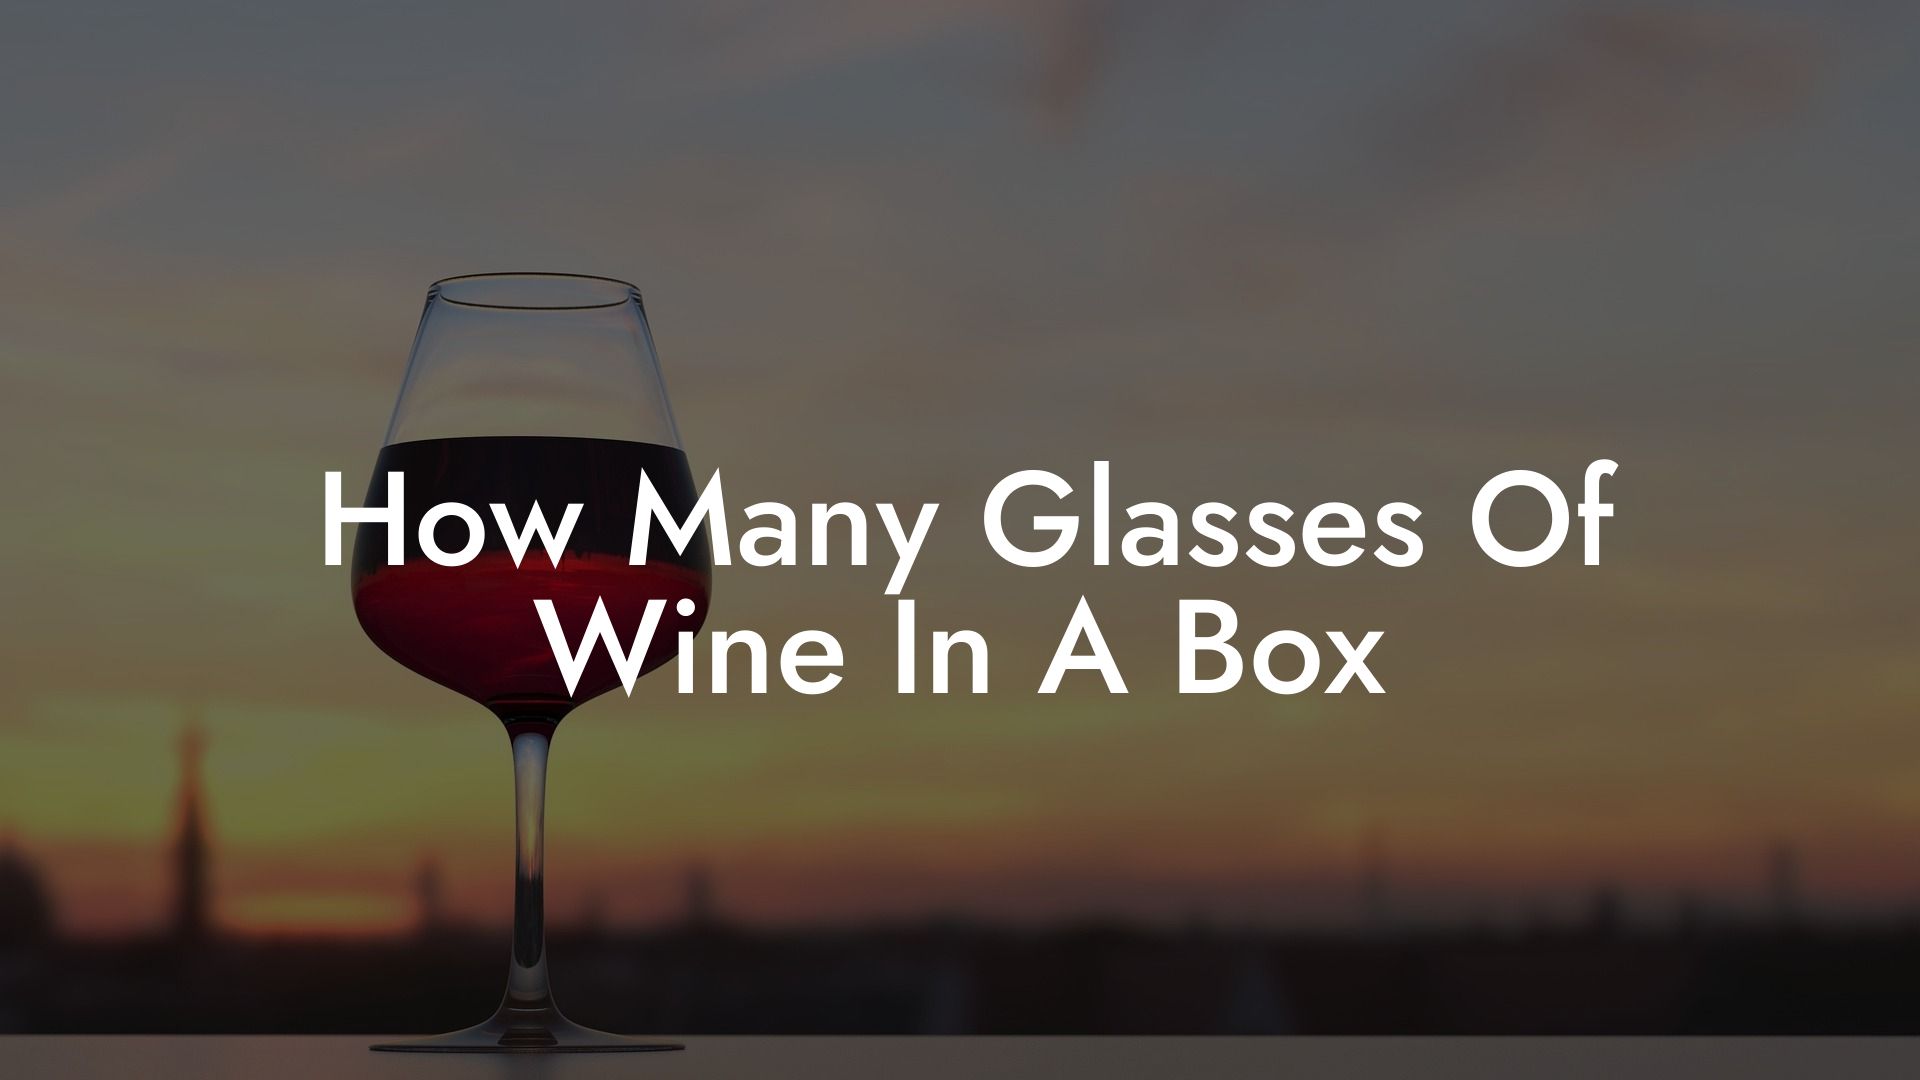 How Many Glasses Of Wine In A Box